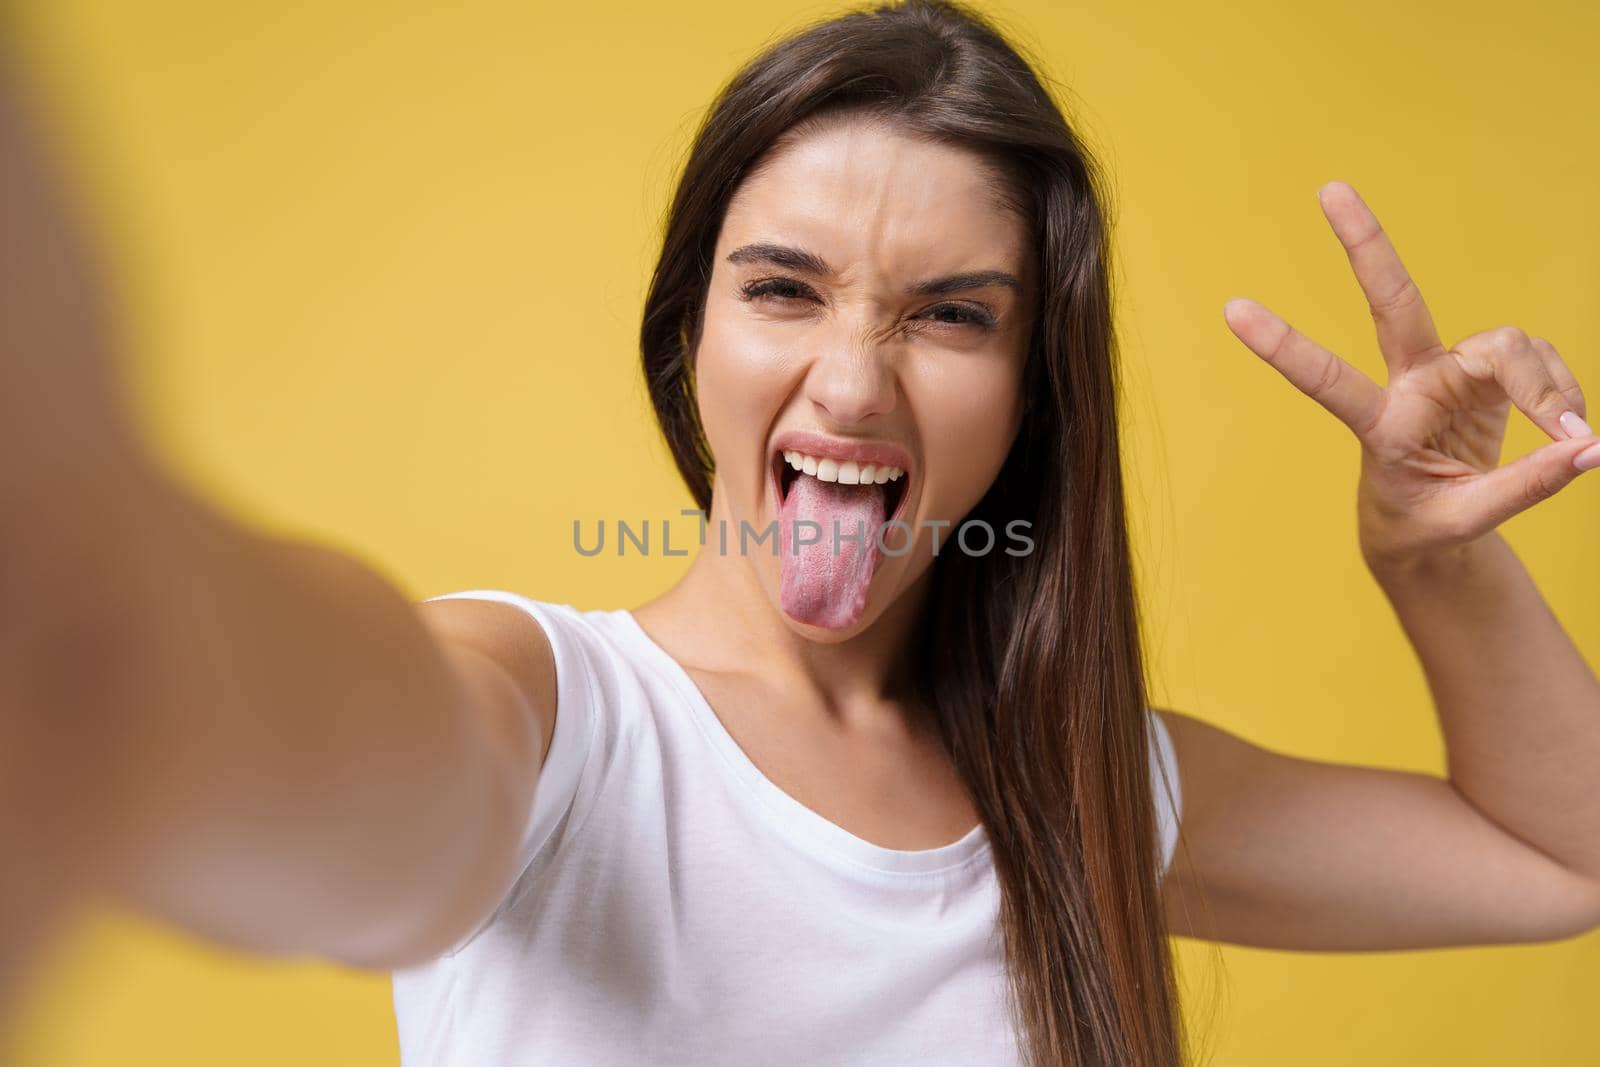 Pleasant attractive girl making selfie in studio and laughing. Good-looking young woman with brown hair taking picture of herself on bright yellow background